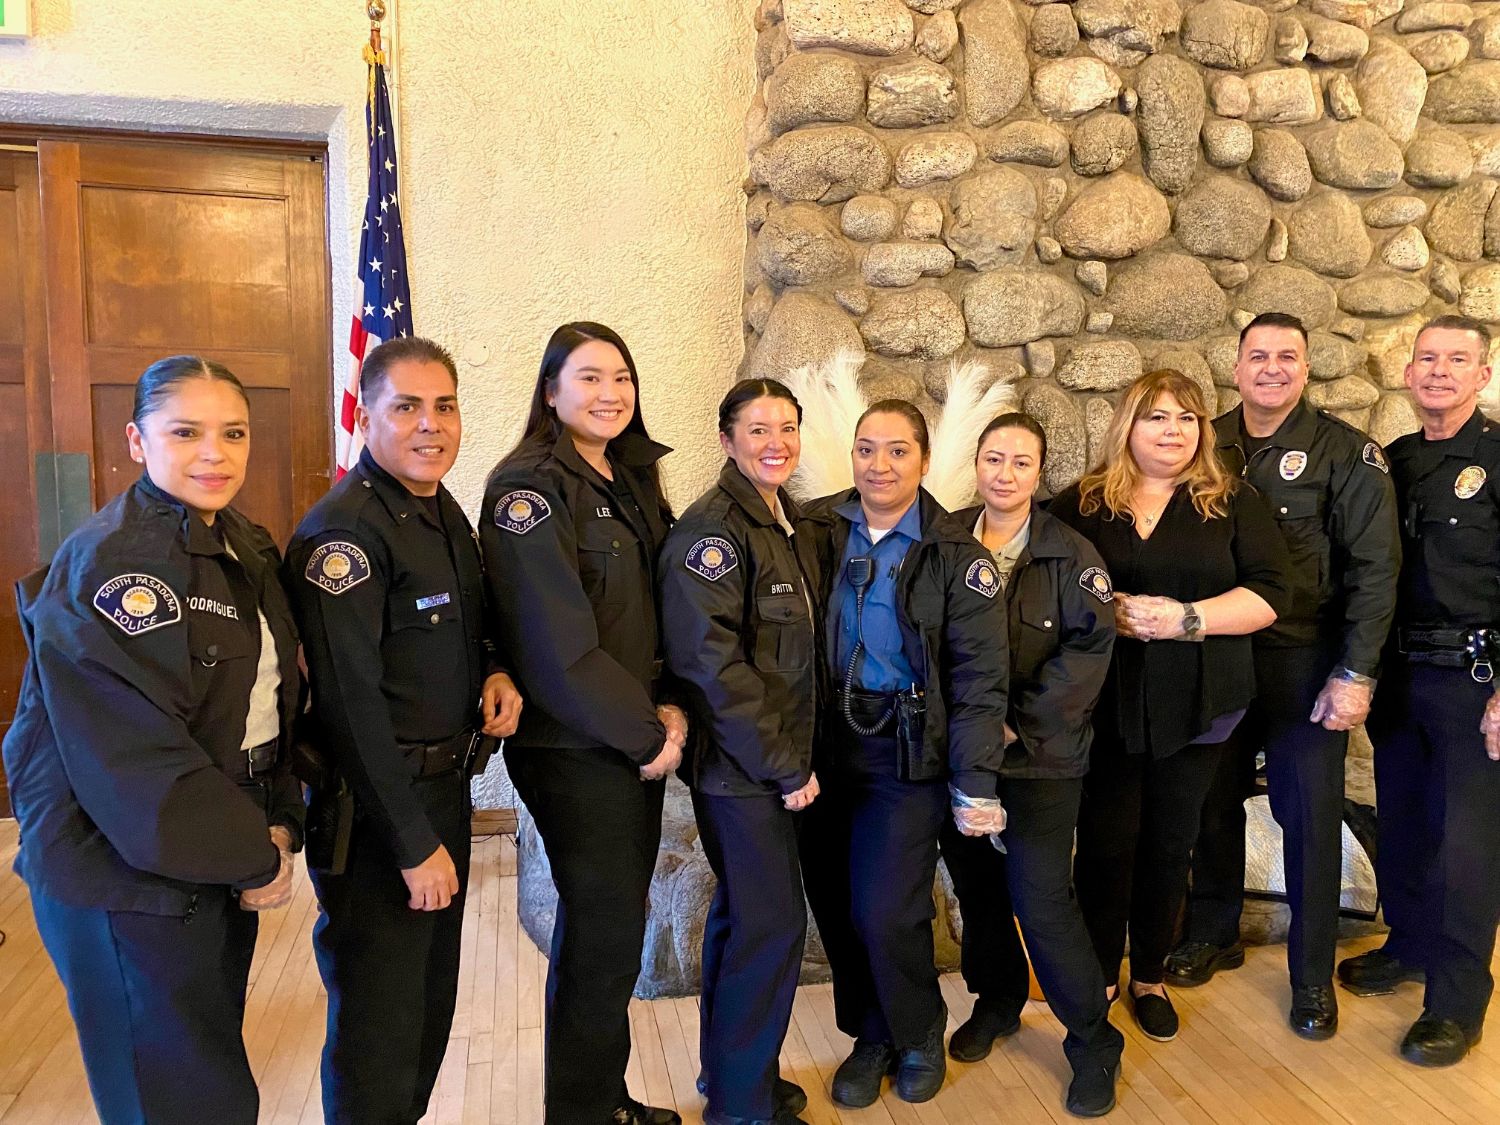 PHOTO: Alisa Hayashida | The South Pasadenan | South Pasadena Police Chief Brian Solinsky (2nd from right) along with SPPD officers and staff sponsored the Thanksgiving luncheon and were on hand to help serve the meal.